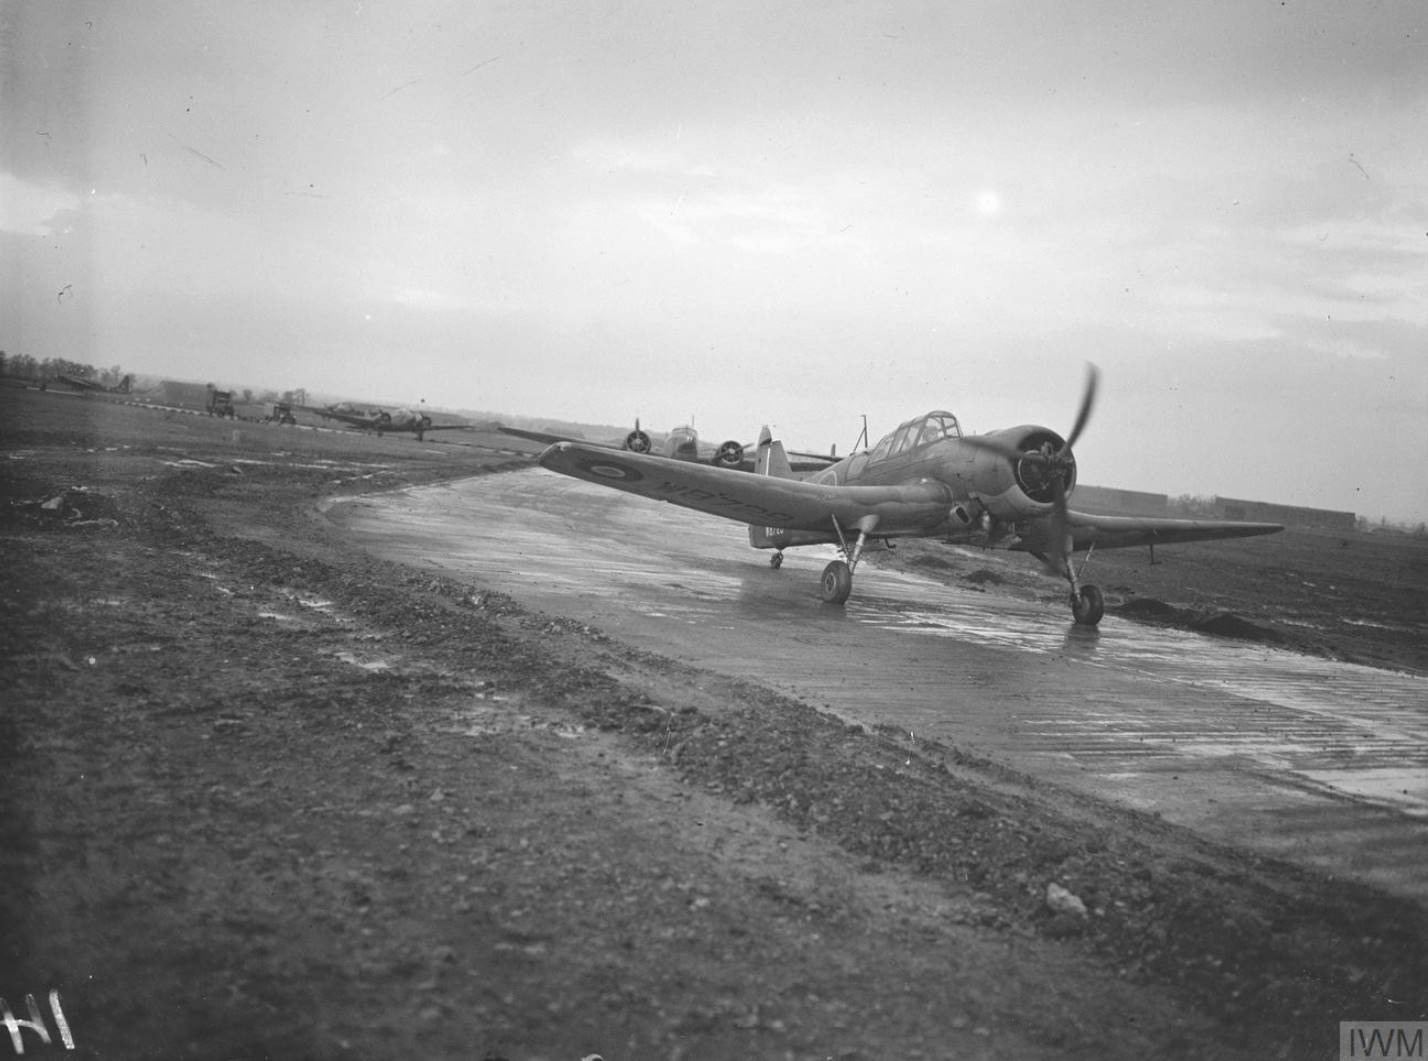 Master III W8729 of the Empire Central Flying School, struck off charge June 1944 after serving two others flying schools, фотография Imperial War Museum